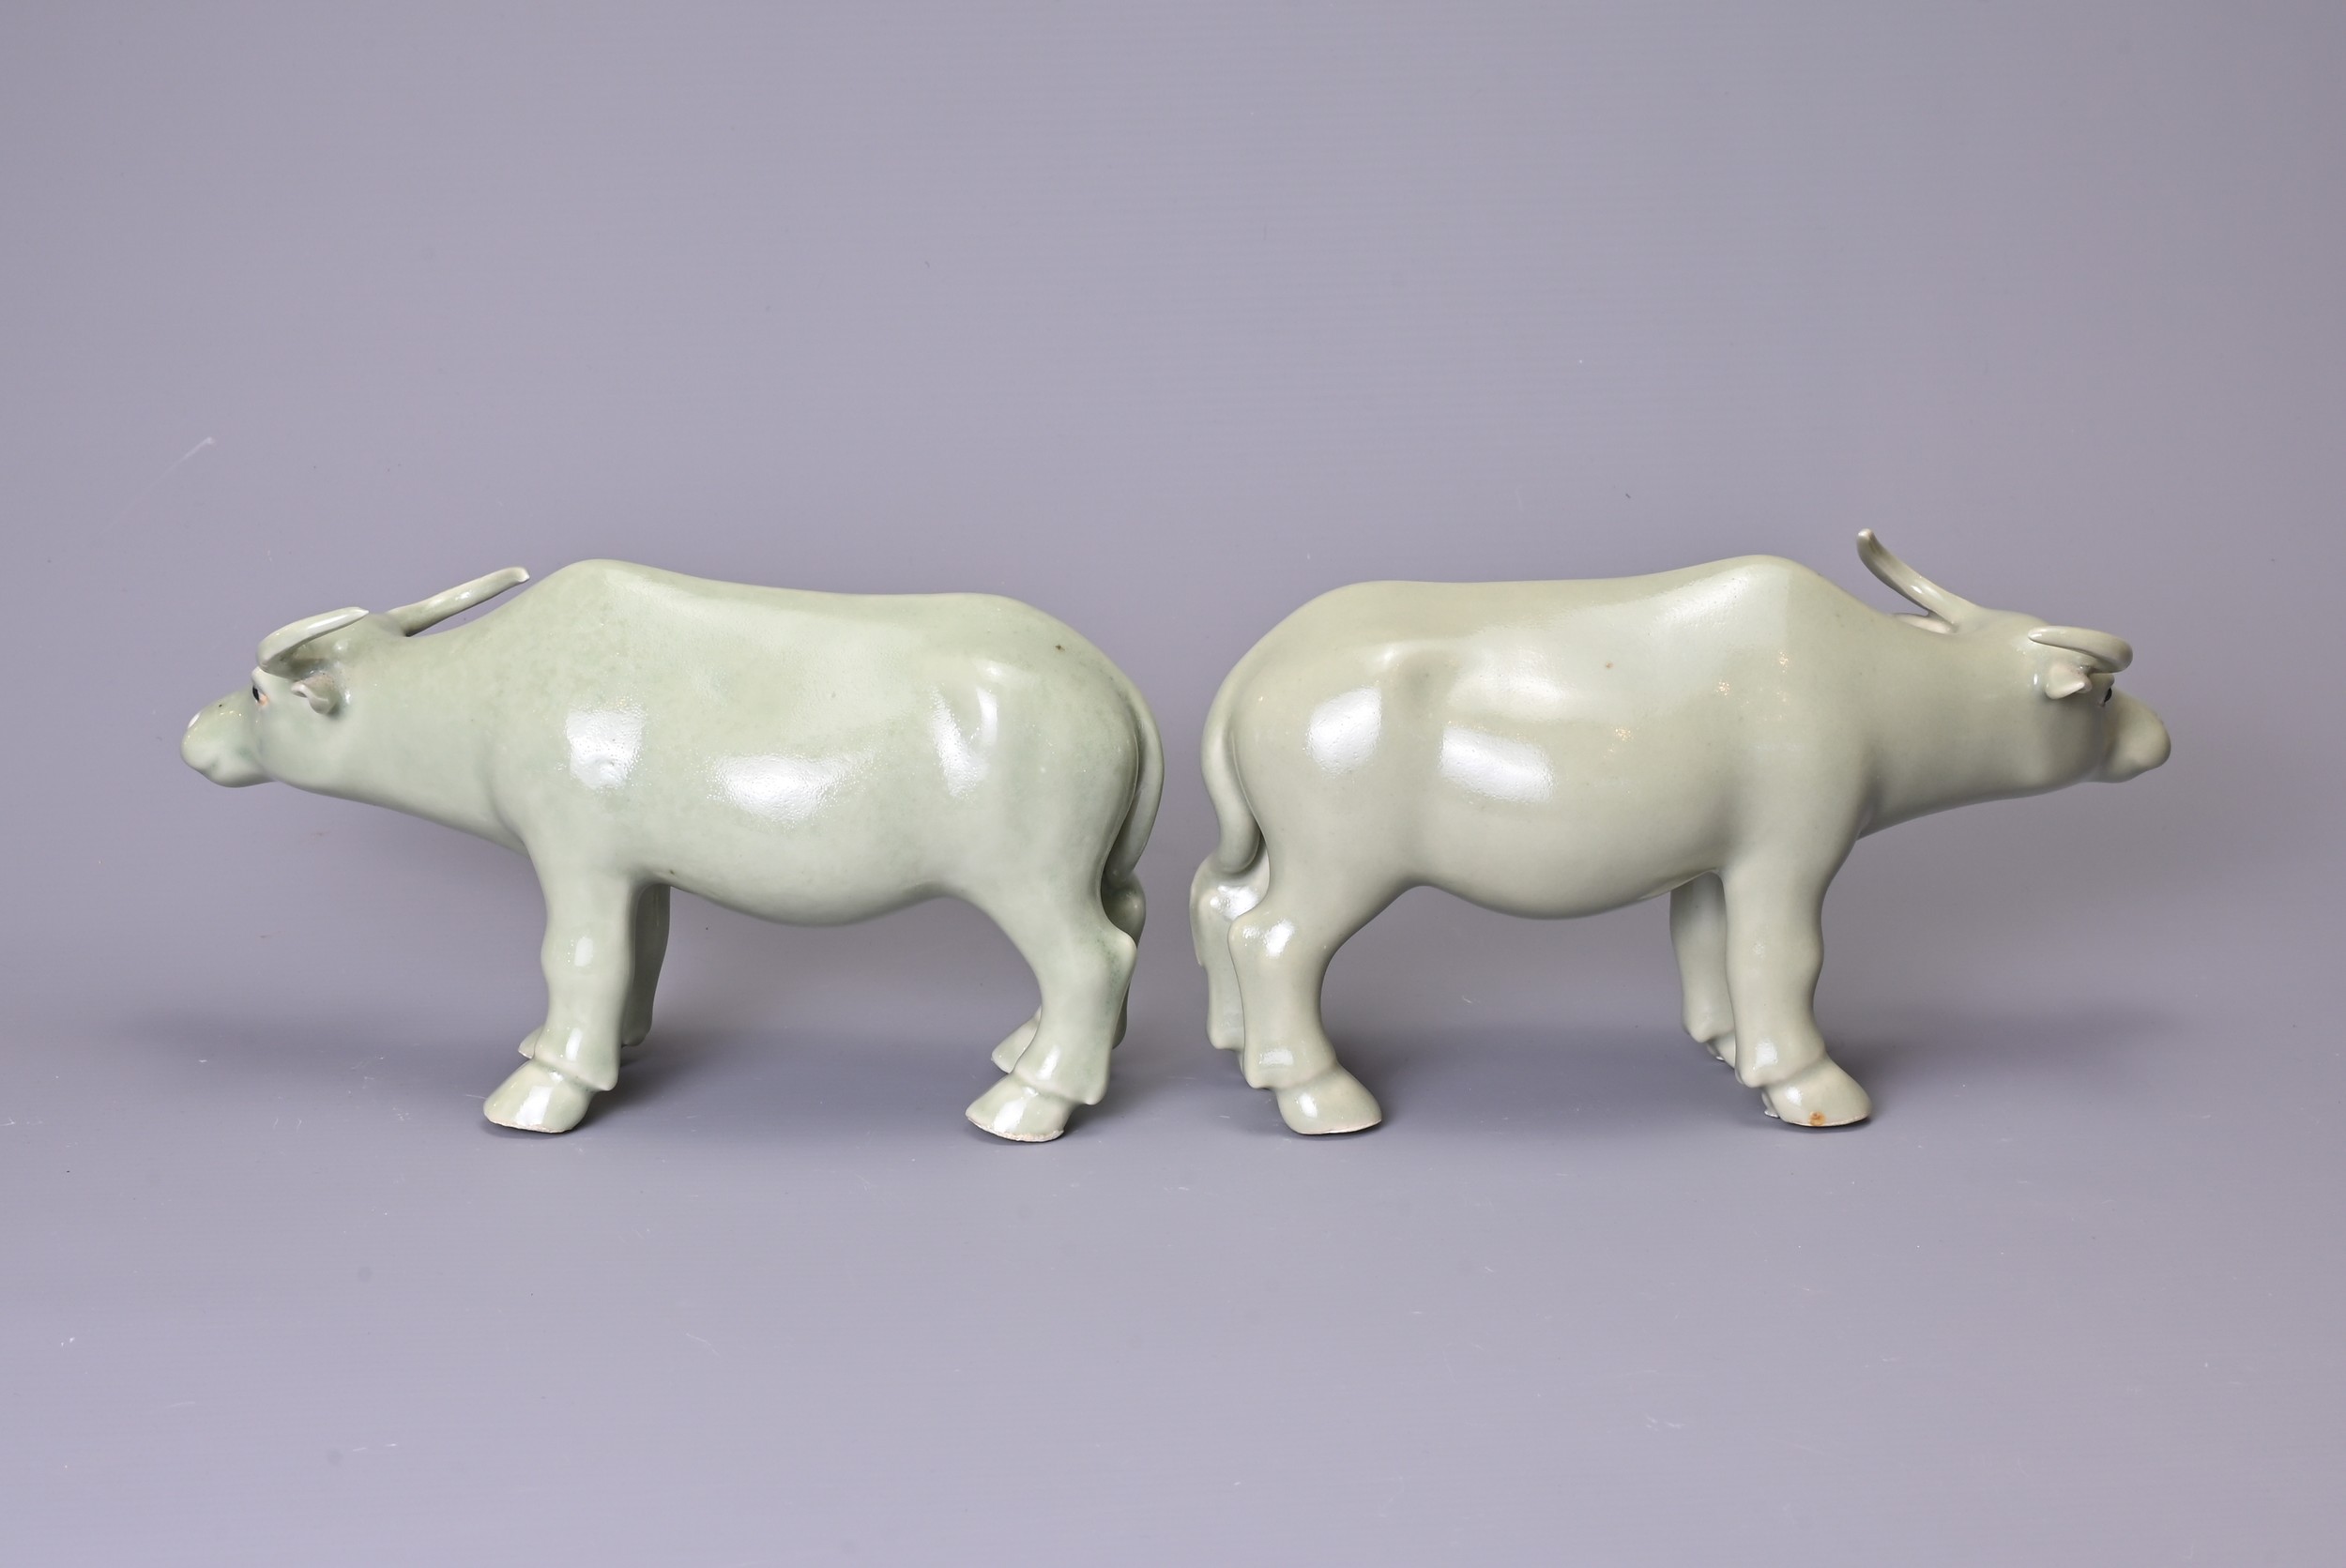 A PAIR OF CHINESE CELADON GLAZED PORCELAIN MODELS OF OX, 20th Century, approx. 21 cm long (2) - Image 3 of 5